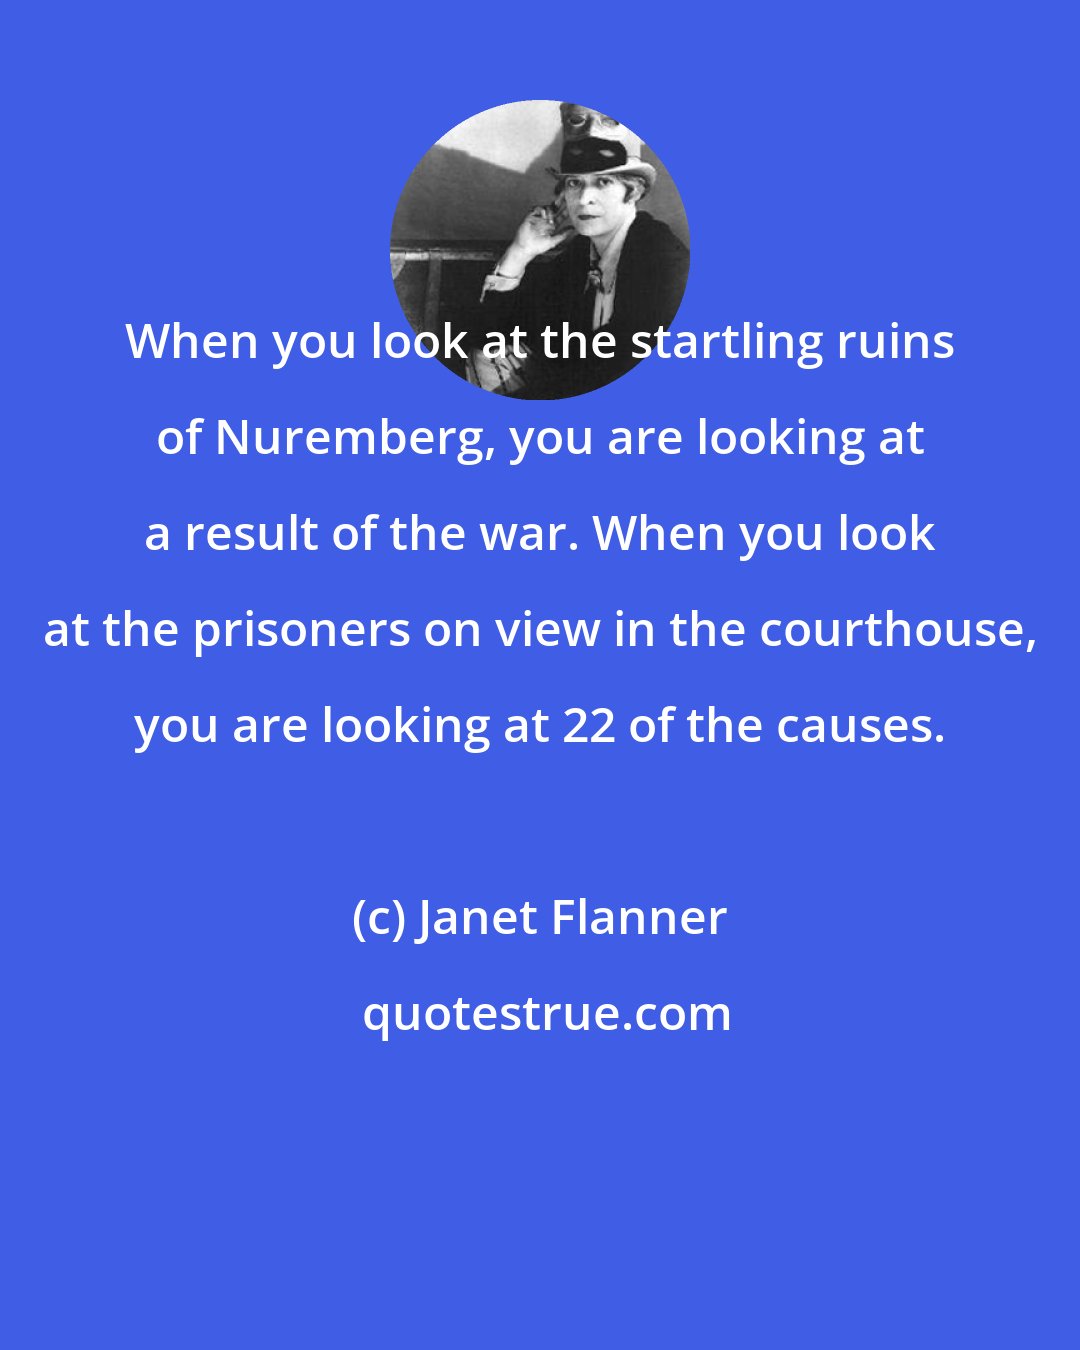 Janet Flanner: When you look at the startling ruins of Nuremberg, you are looking at a result of the war. When you look at the prisoners on view in the courthouse, you are looking at 22 of the causes.